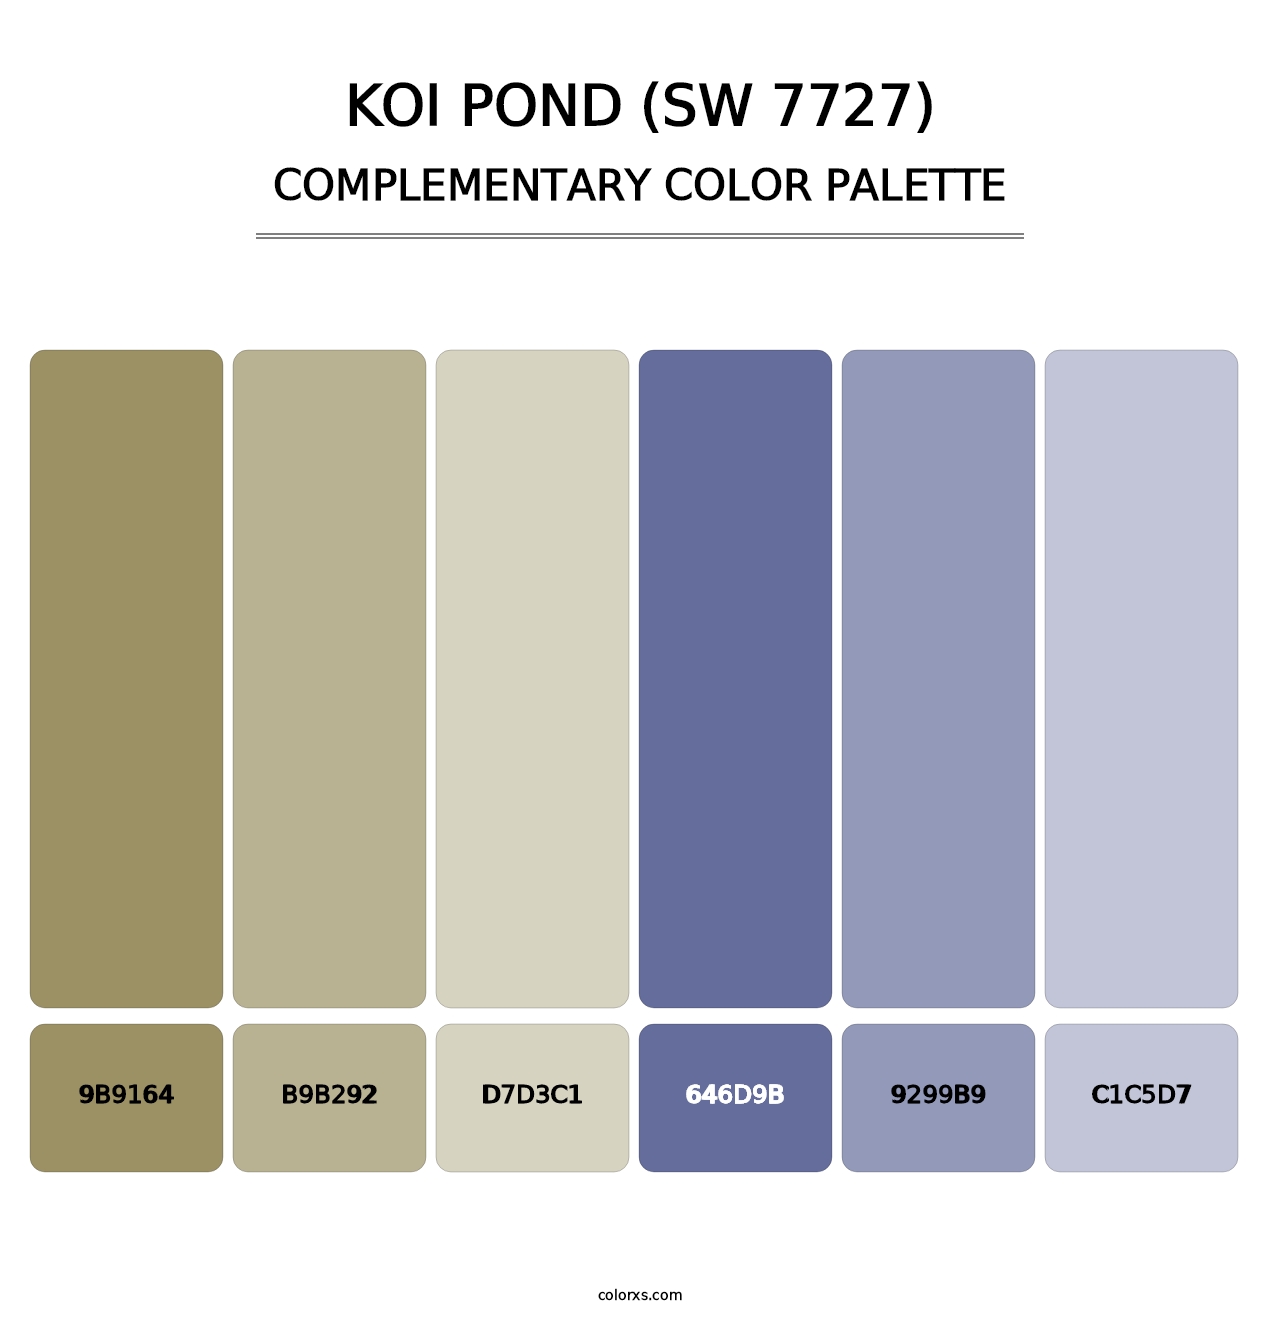 Koi Pond (SW 7727) - Complementary Color Palette